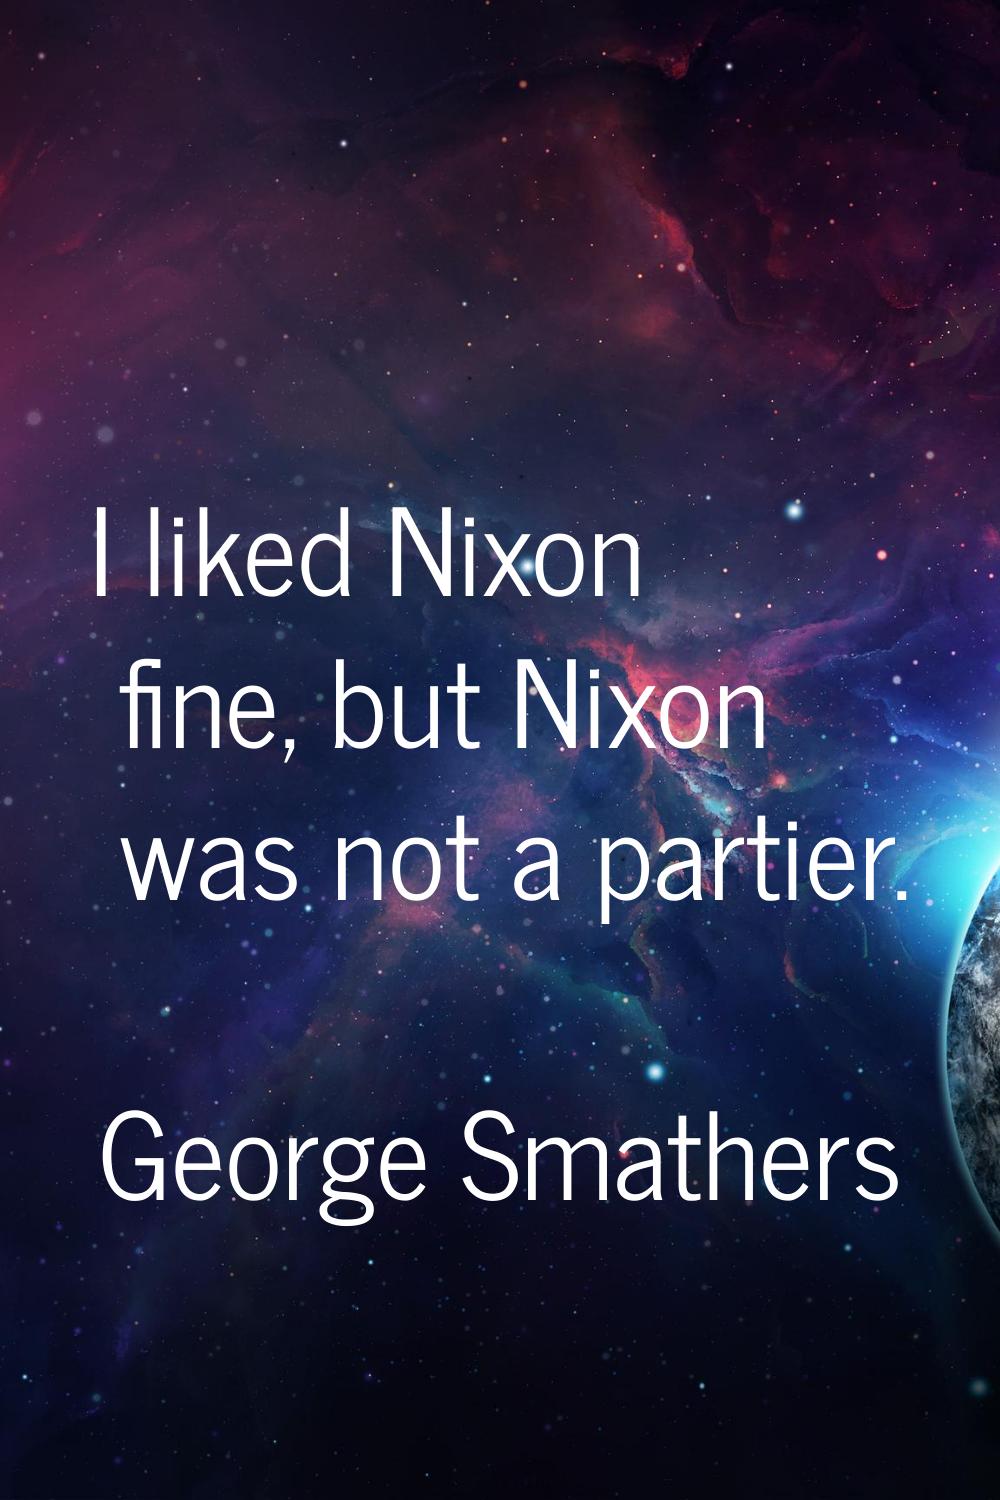 I liked Nixon fine, but Nixon was not a partier.